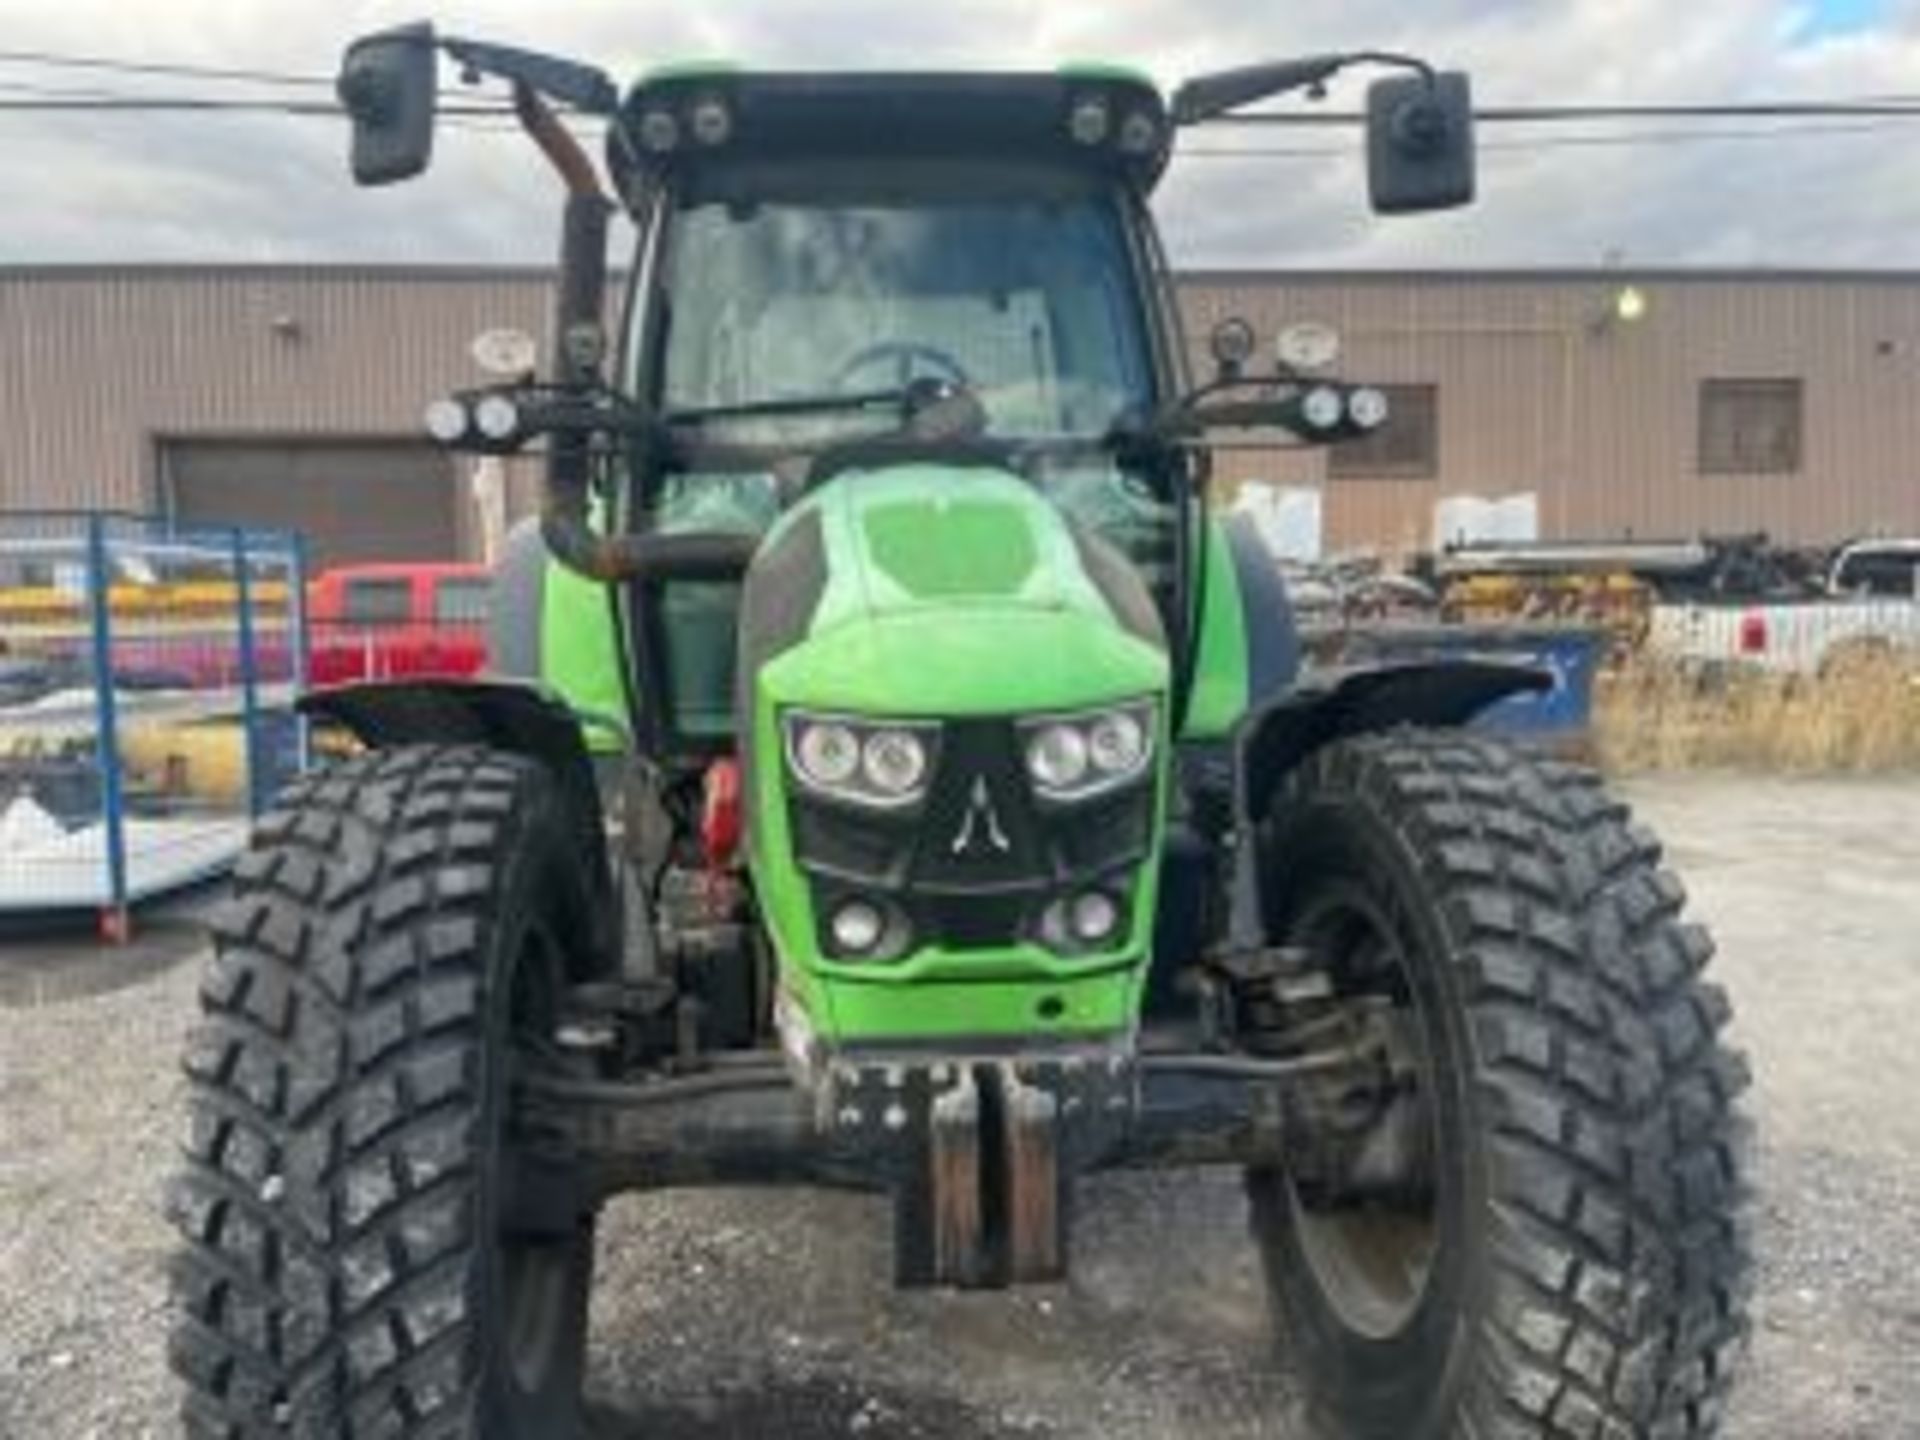 2018 DEUTZ-FAHR agricultural tractor # T51-10003 With PRONOVOST snow removal attachment 1109.8 Hours - Image 2 of 27